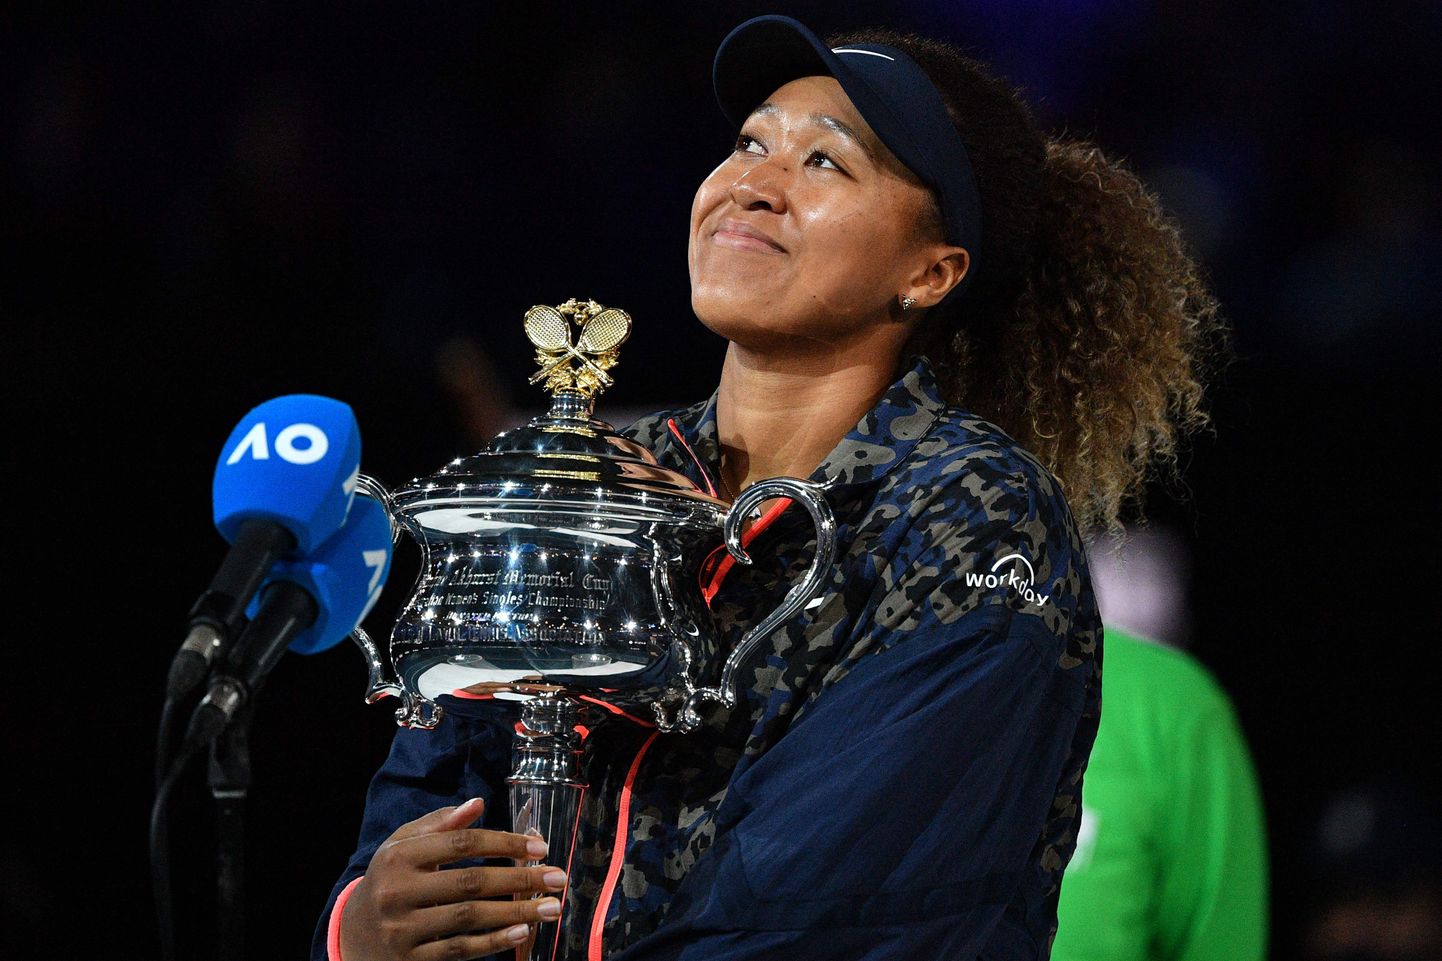 Japan's Naomi Osaka holds the Daphne Akhurst Memorial Cup trophy after beating Jennifer Brady of the US to win her women's singles final match on day thirteen of the Australian Open tennis tournament in Melbourne on February 20, 2021. (Photo by Paul CROCK / AFP) / -- IMAGE RESTRICTED TO EDITORIAL USE - STRICTLY NO COMMERCIAL USE --